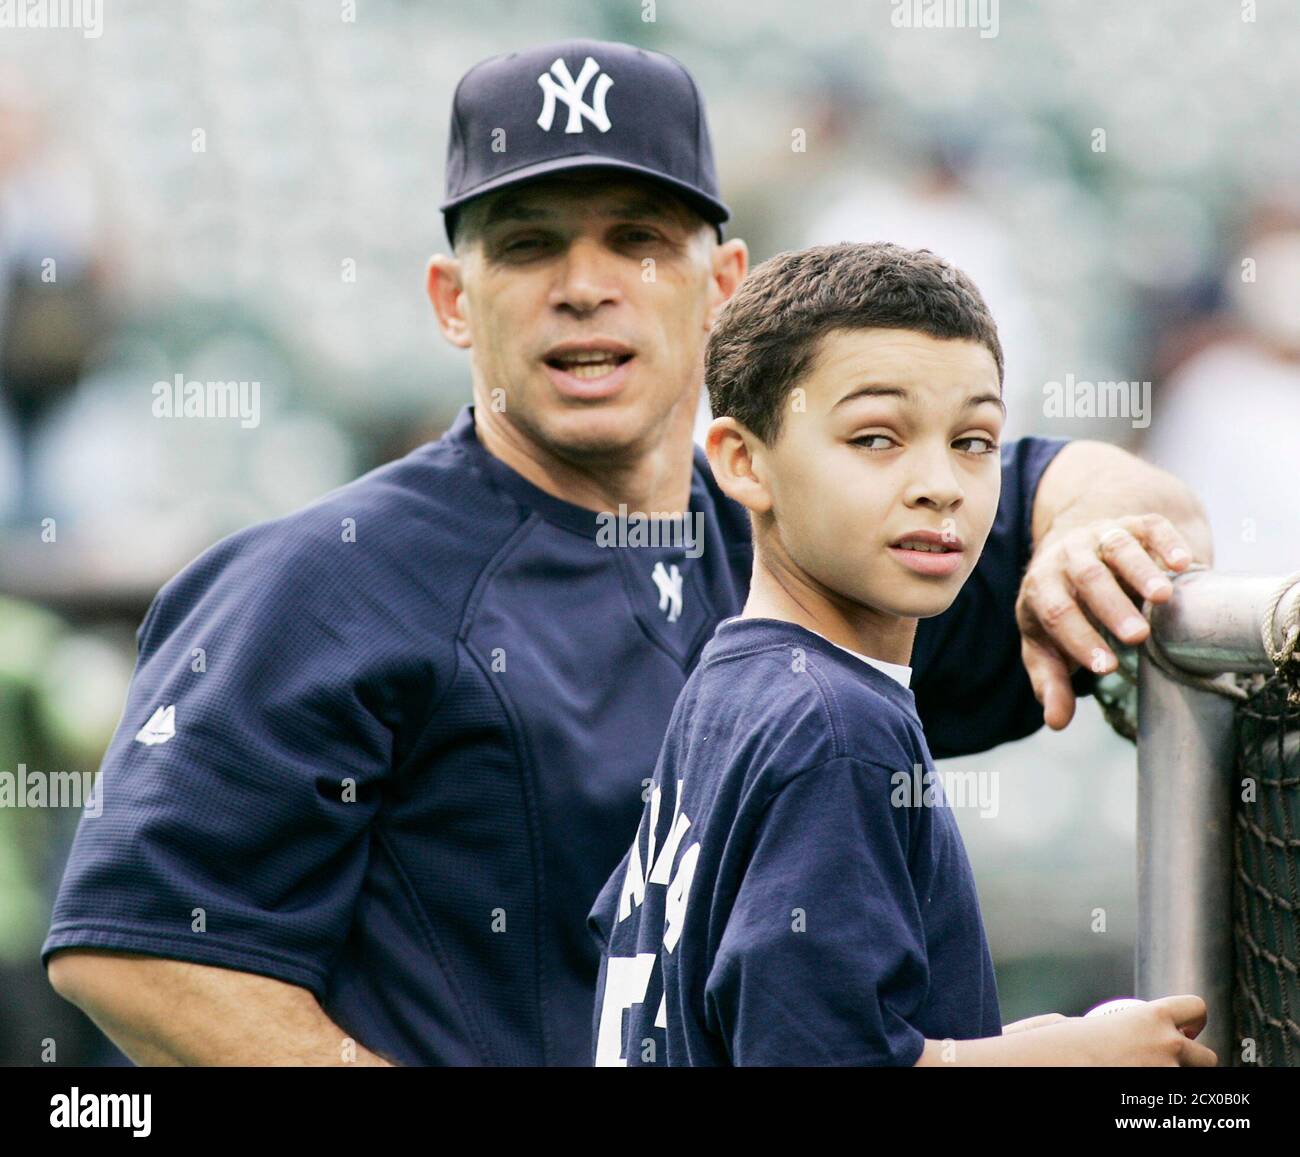 New York Yankees manager Joe Girardi (L) is shown with Yankees fan,  10-year-old Sean James from New York, during batting practice before the  Yankees MLB American League baseball game against the Baltimore